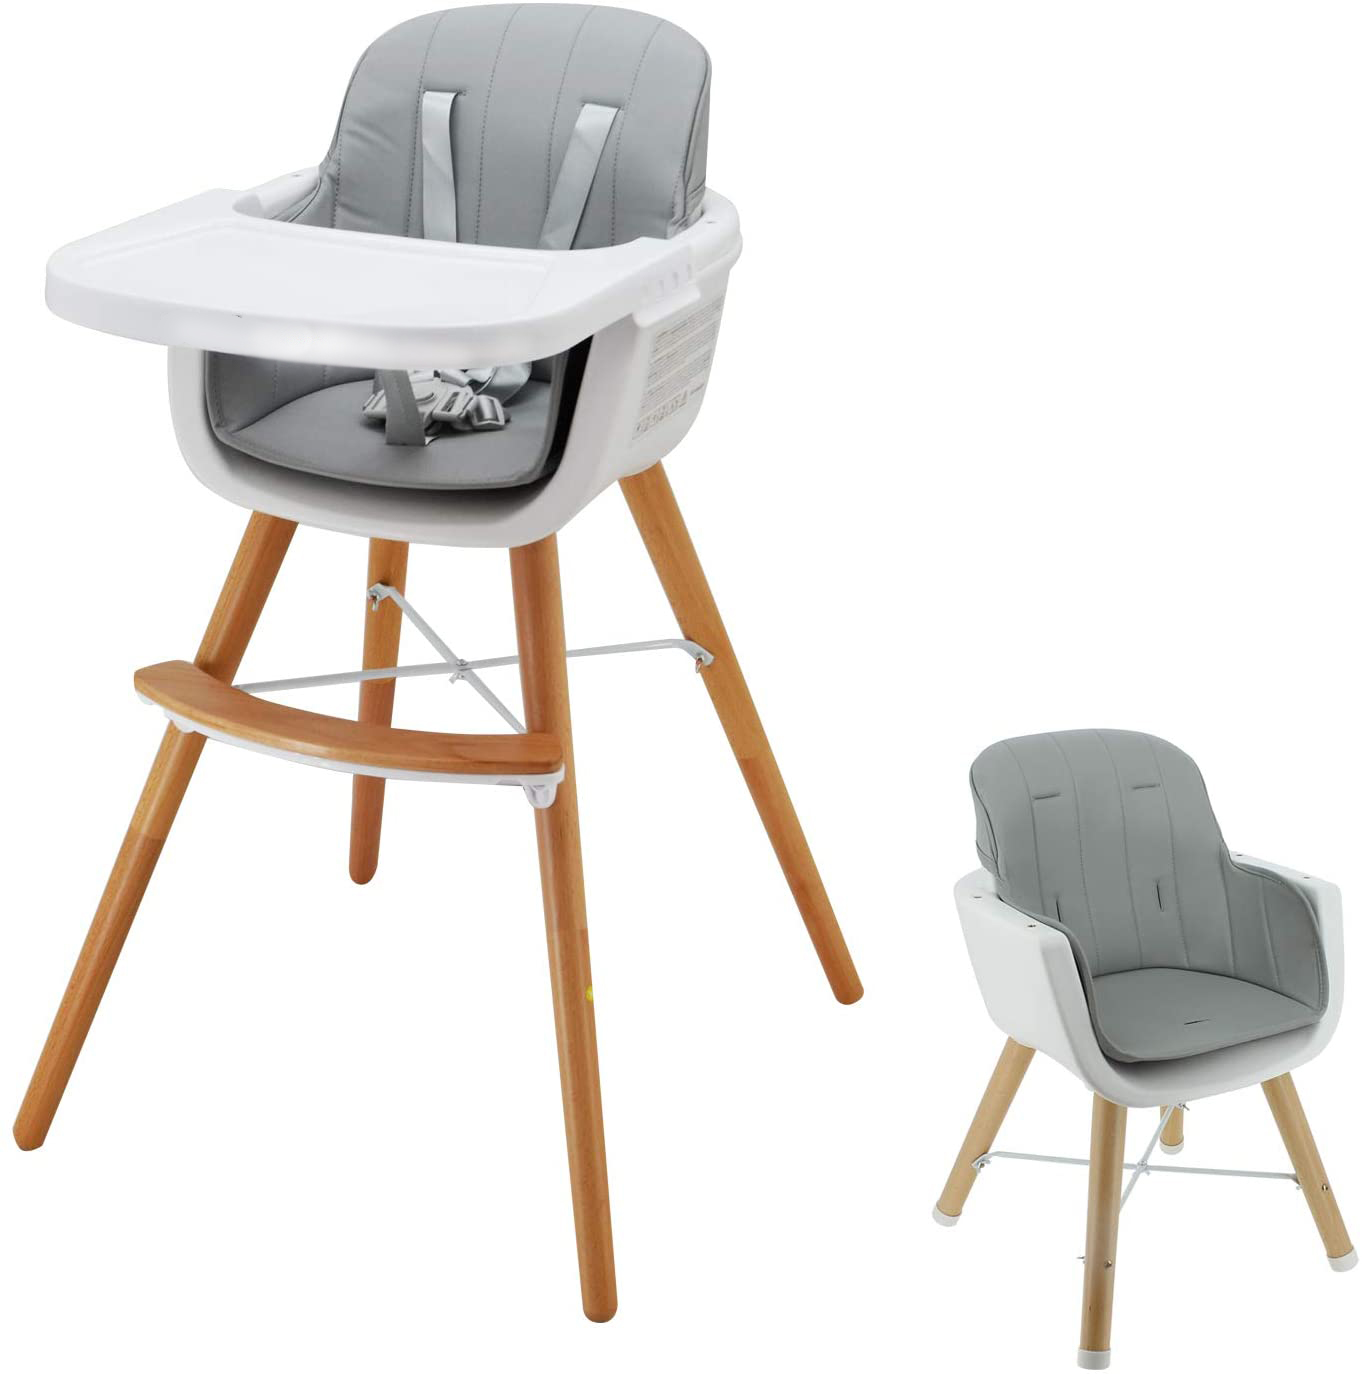 Acplaypen Baby Wooden HighChair for Baby and Toddlers with a Soft Seat, Adjustable Baby Feeding Chair Maggie  Two-Tier and a Removable Tray, Grey